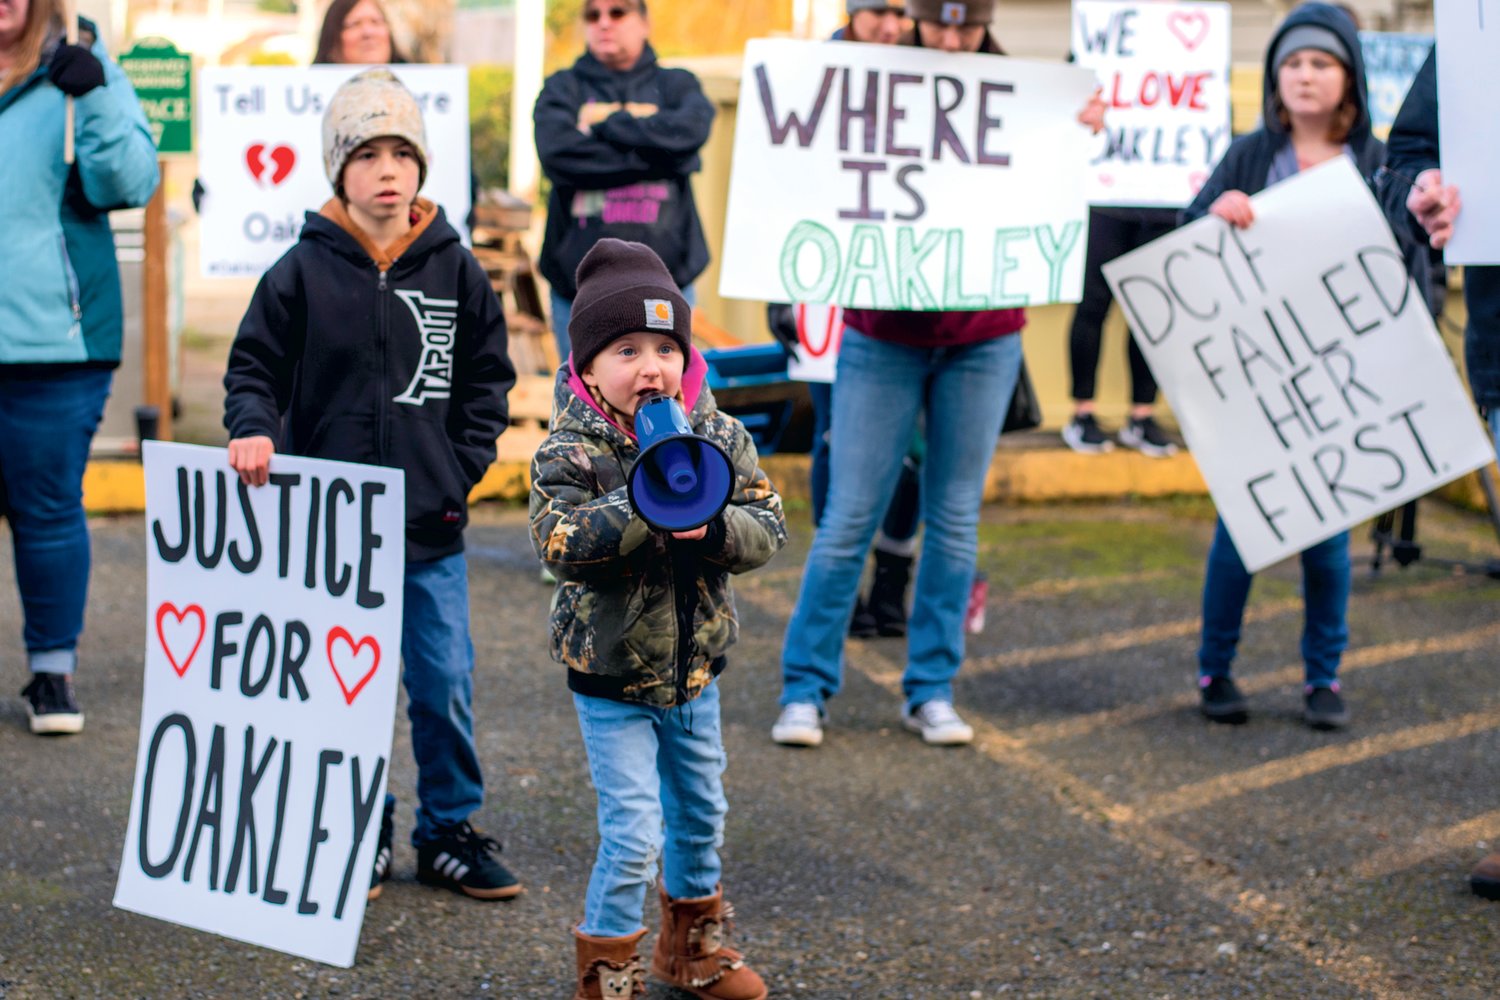 Aubrey Wolfe, 5, stands next to her brother Easton, 10, while yelling into a megaphone outside the Grays Harbor County Correctional Facility during a demonstration for missing Oakley Carlson Saturday in Montesano.